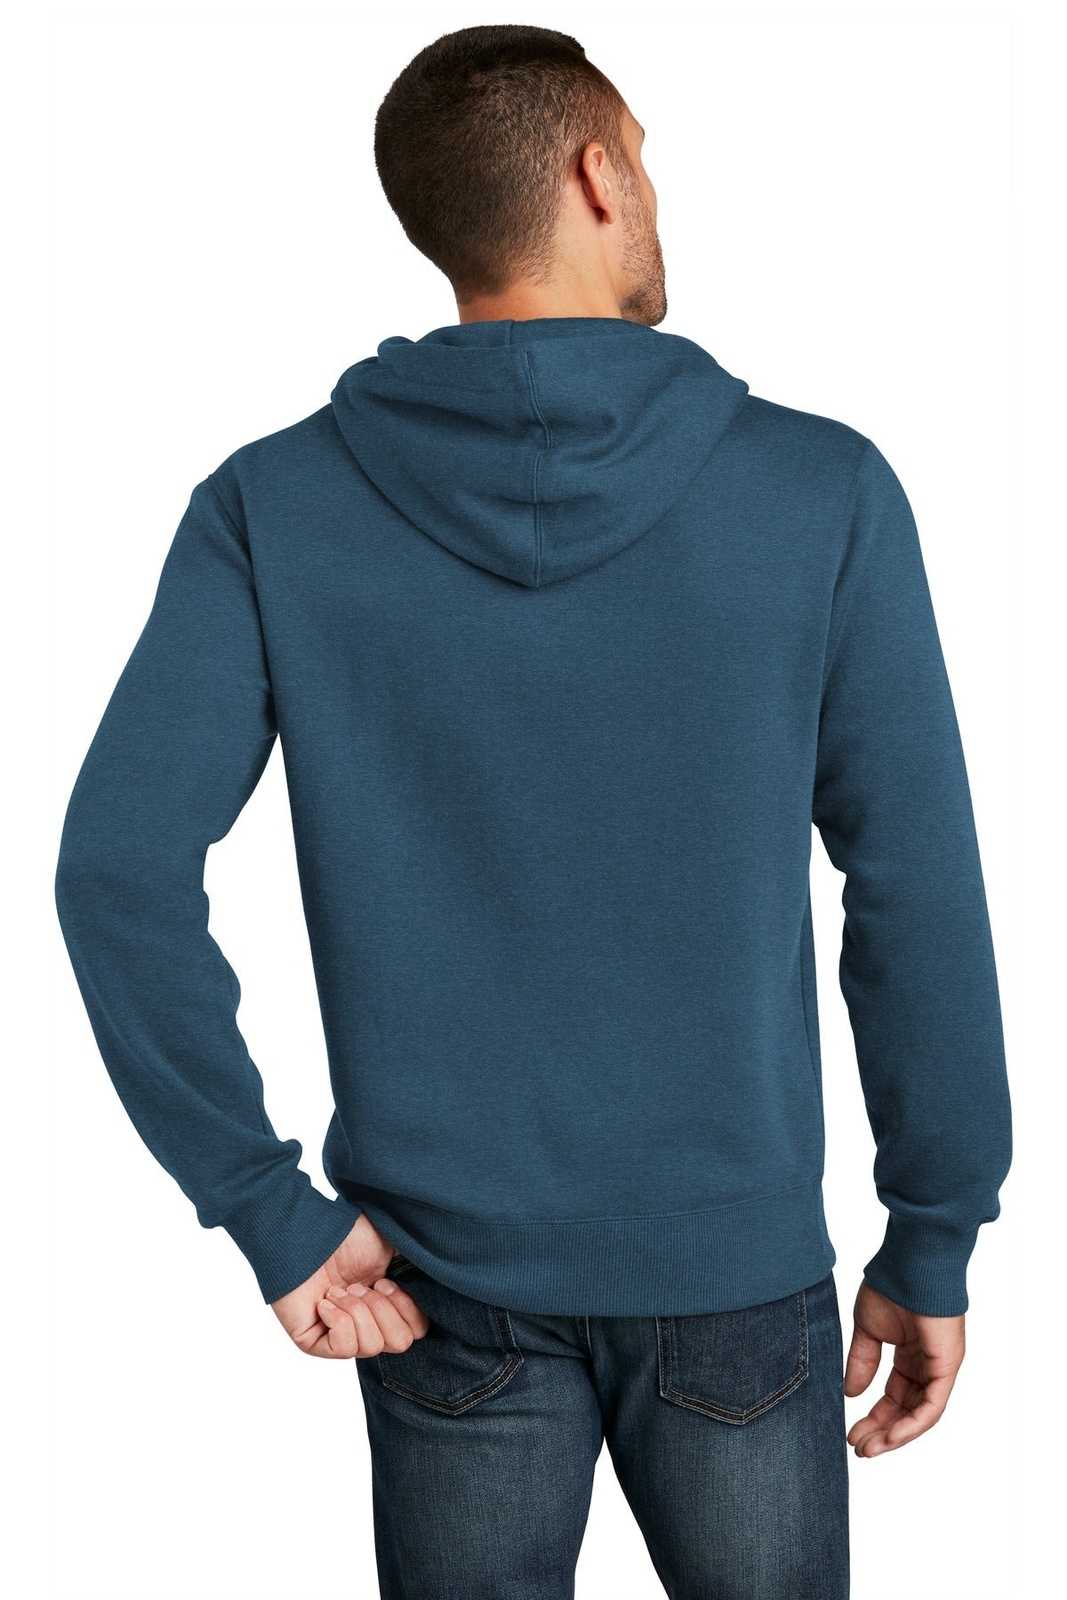 District DT1101 Perfect Weight Fleece Hoodie - Heathered Poseidon Blue - HIT a Double - 1